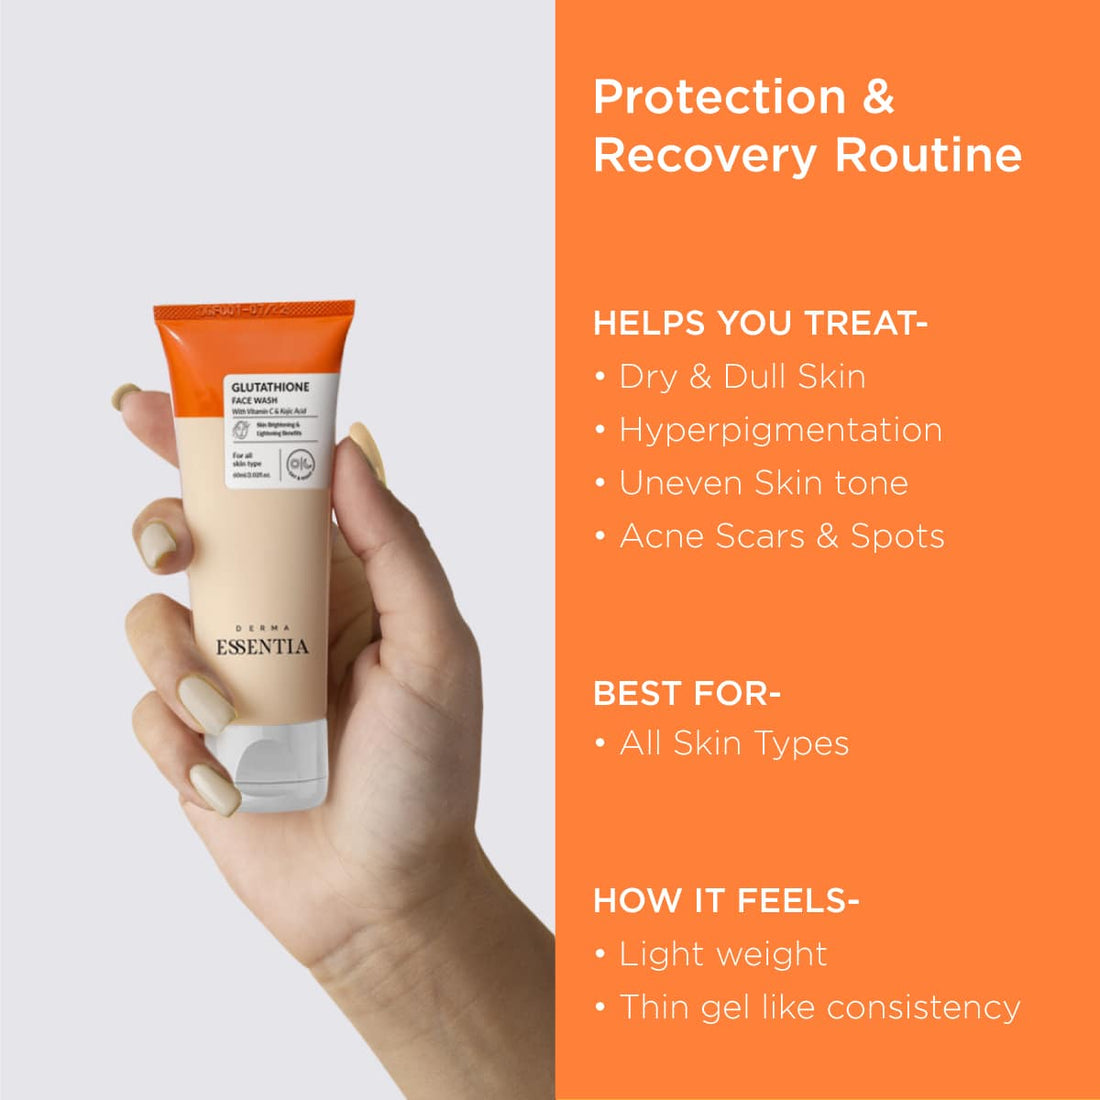 Glutathione Face Wash Derma Essentia Protection Recovery Routine